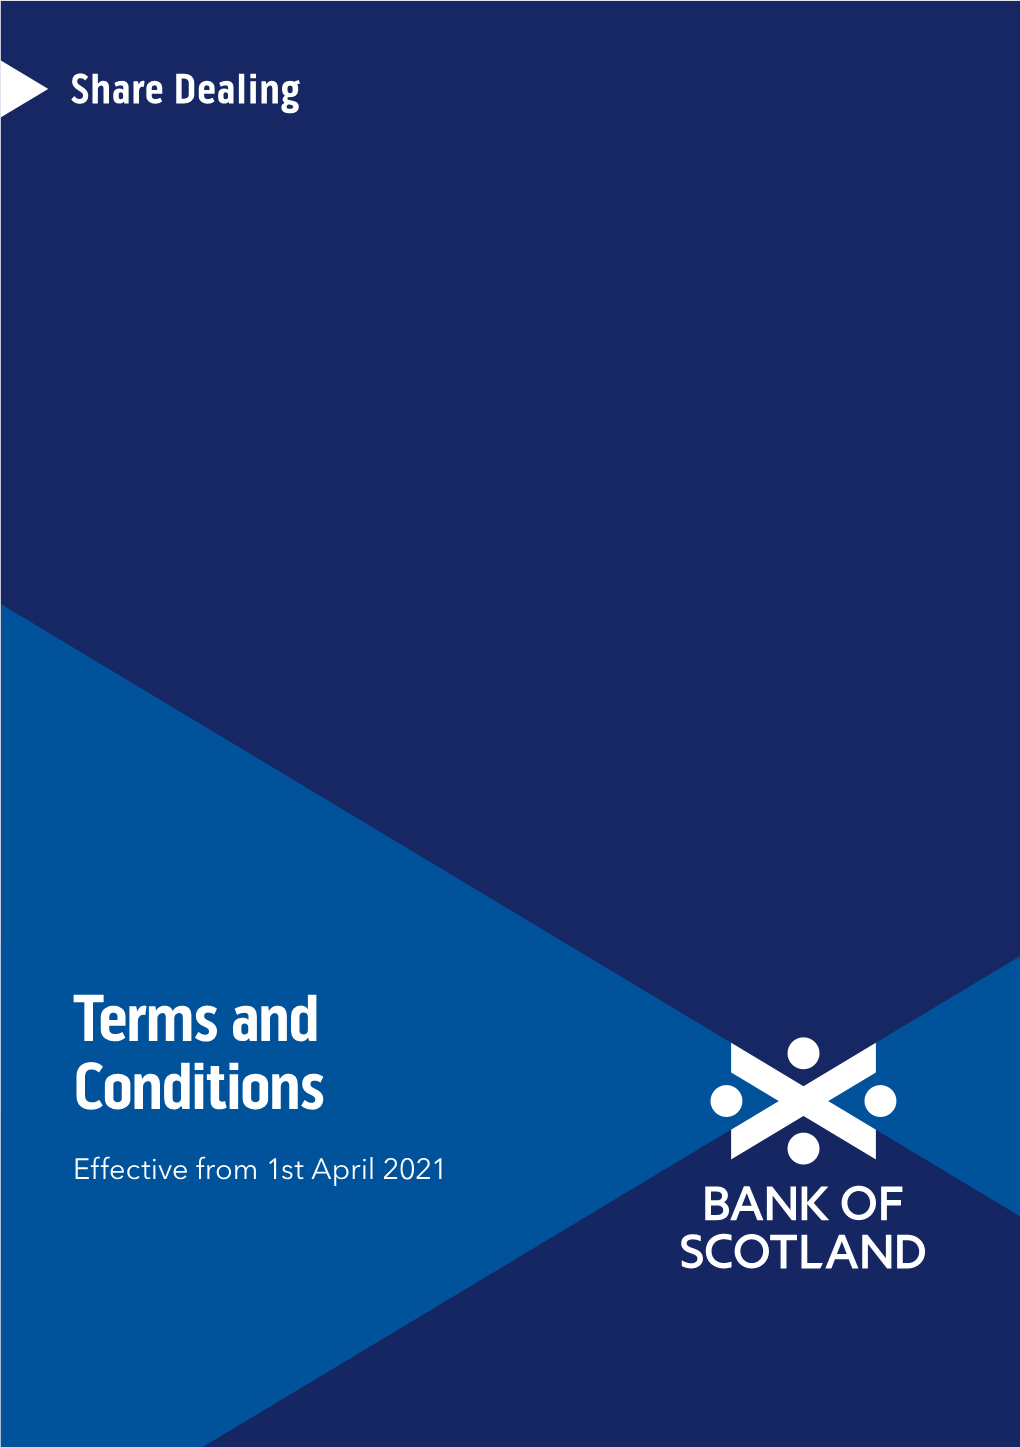 Bank of Scotland Share Dealing Terms & Conditions